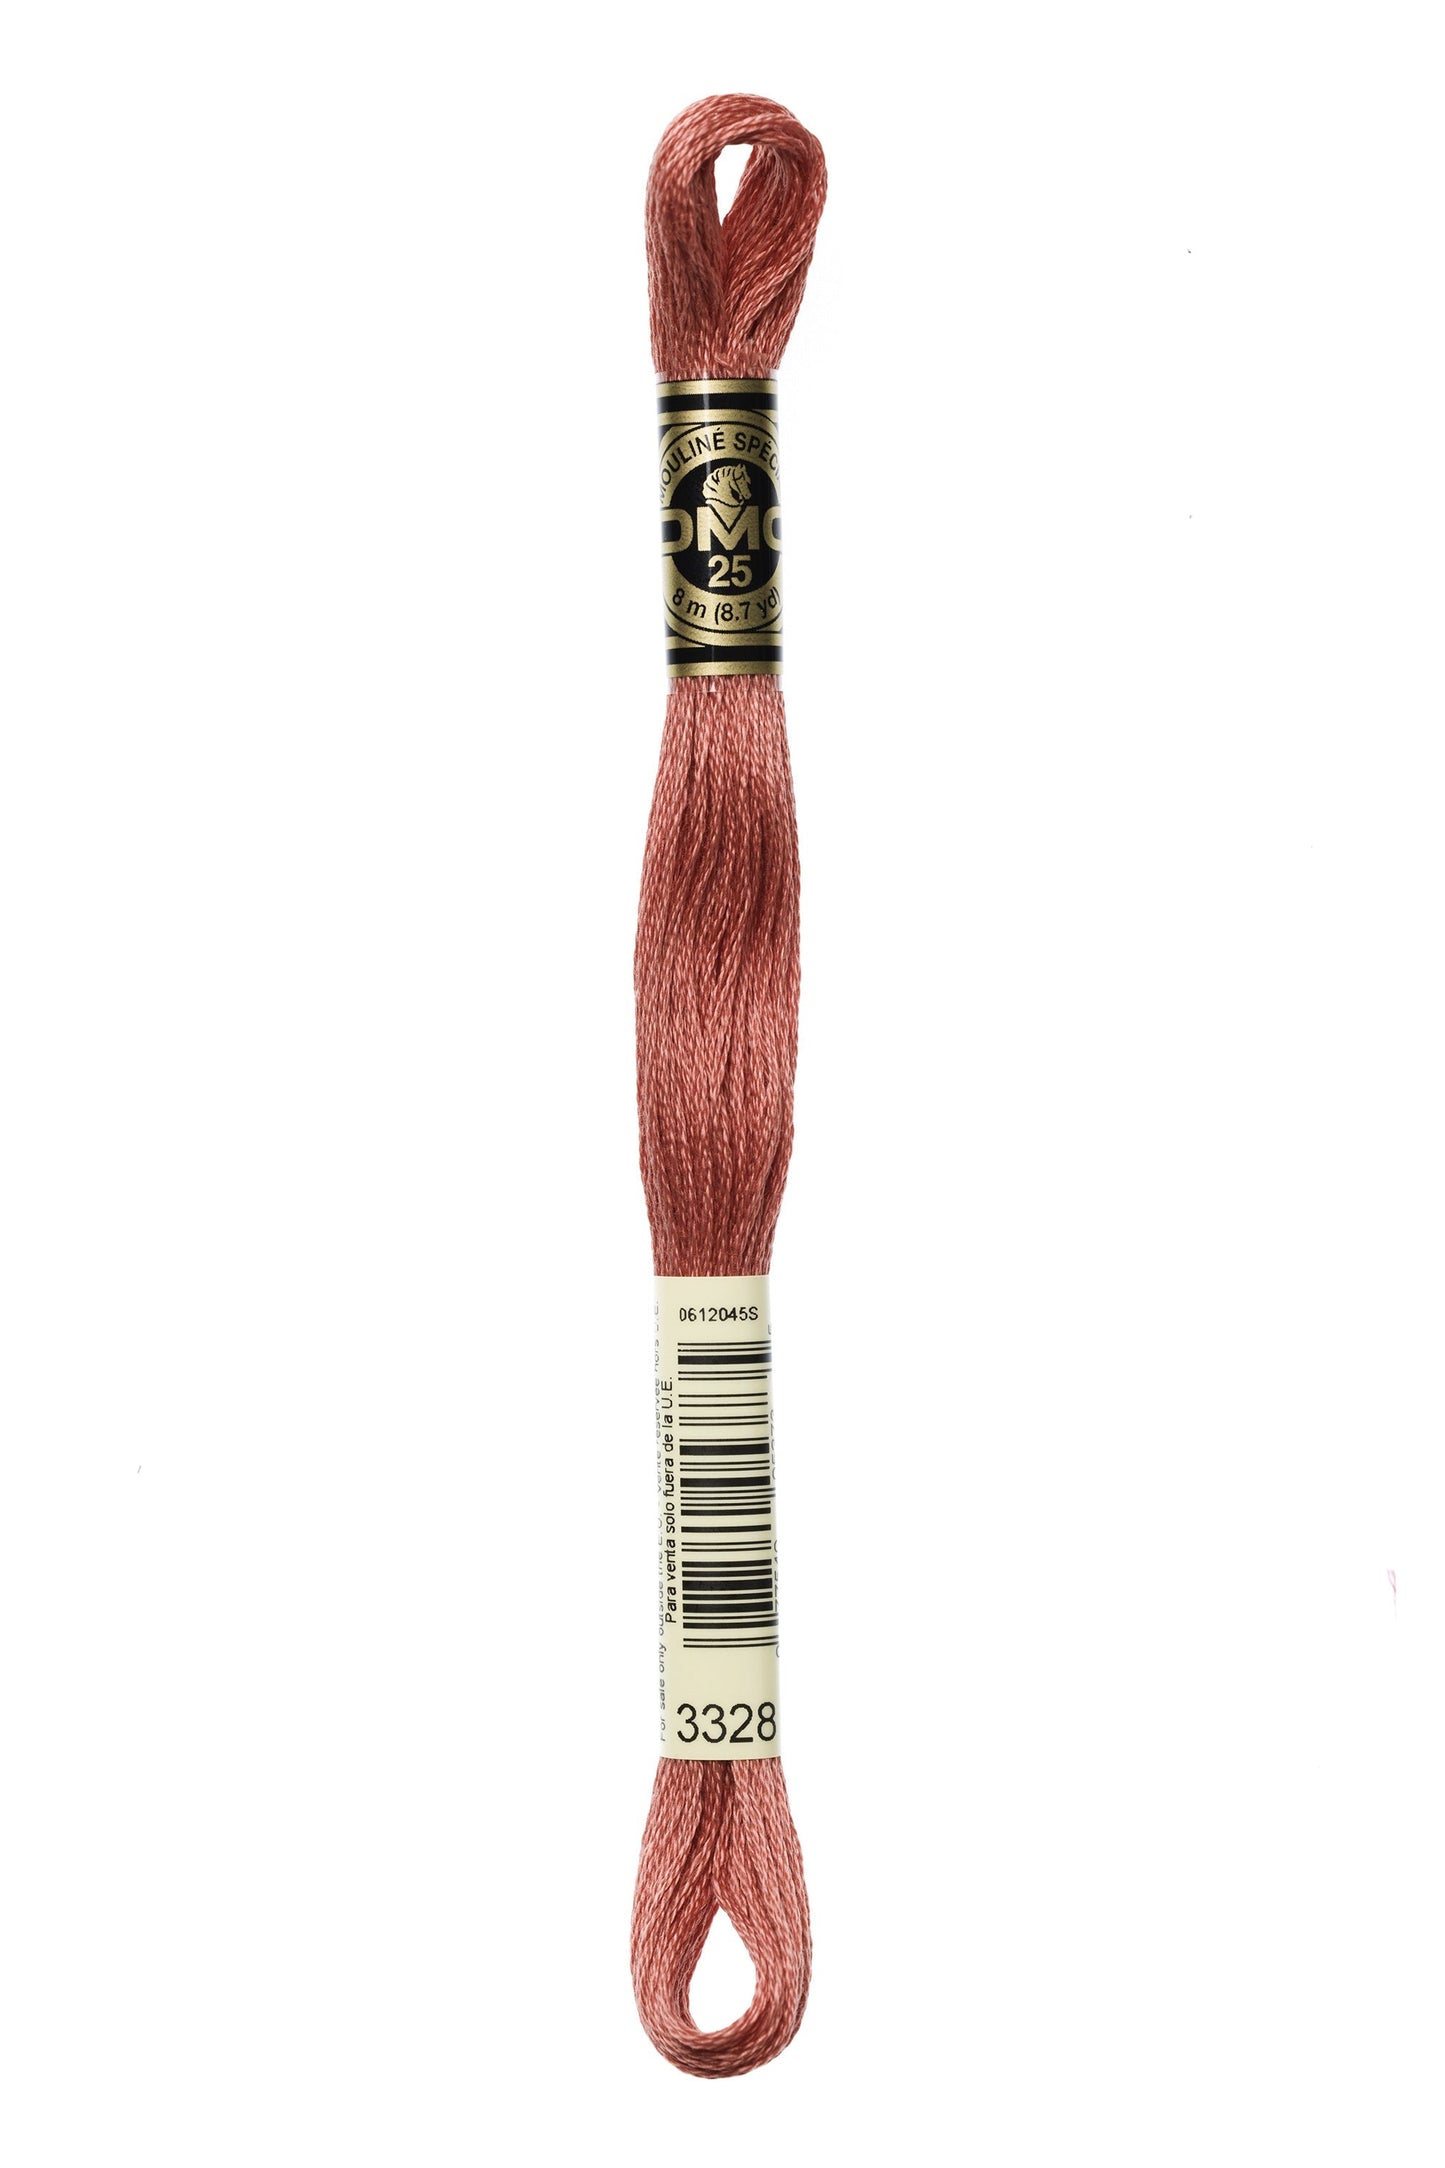 Six-Strand Embroidery Floss - 3328 (Amaranth)-Embroidery Thread-Wild and Woolly Yarns